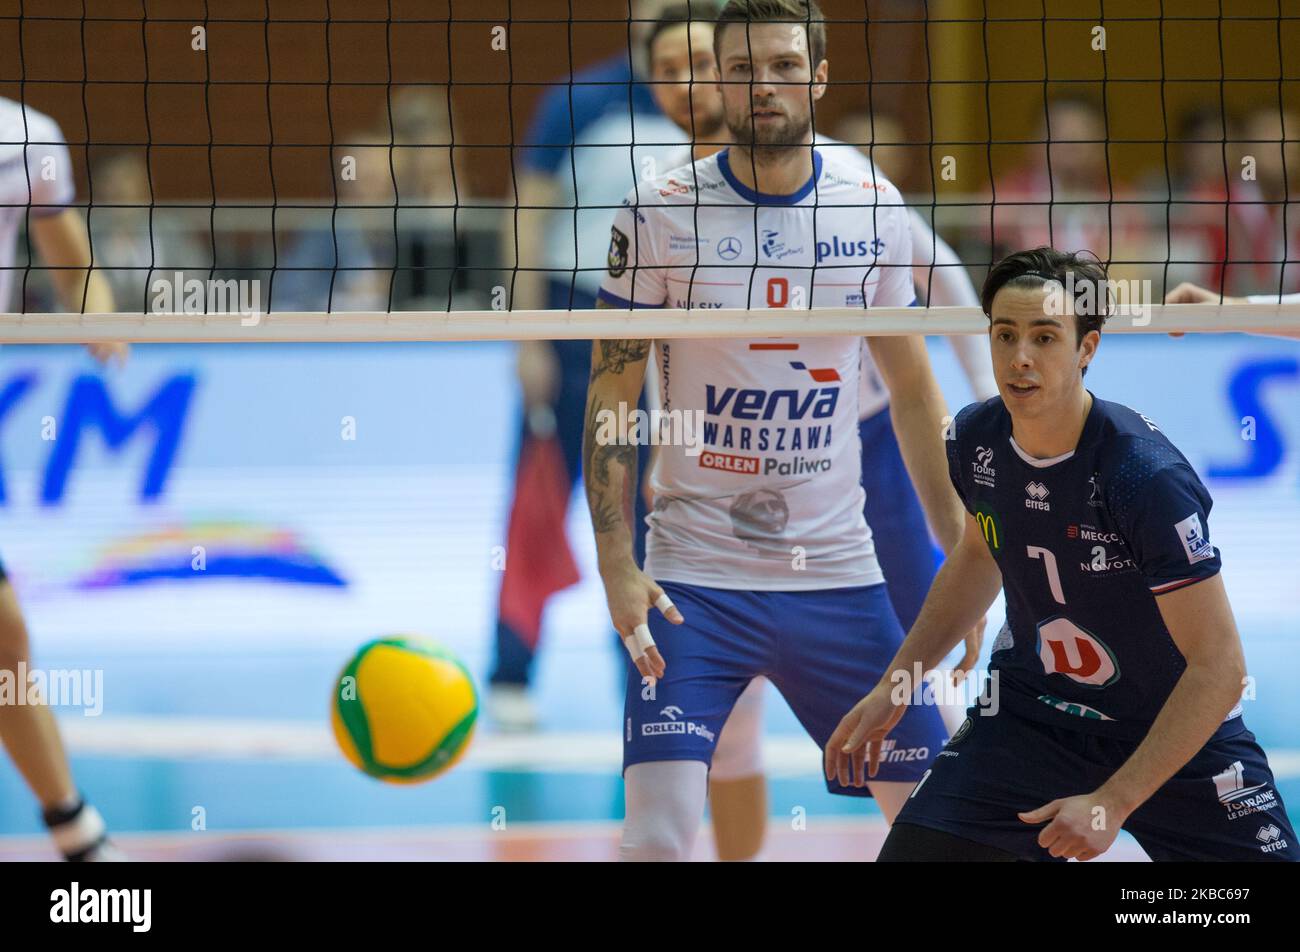 Andrzej Wrona,Angel Trinidad de Haro (Tours) during the CEV Champions League Volley match between Verva Warsaw Orlen Paliwa v Tours VB, in Warsaw, Poland, on December 12, 2019. (Photo by Foto Olimpik/NurPhoto) Stock Photo